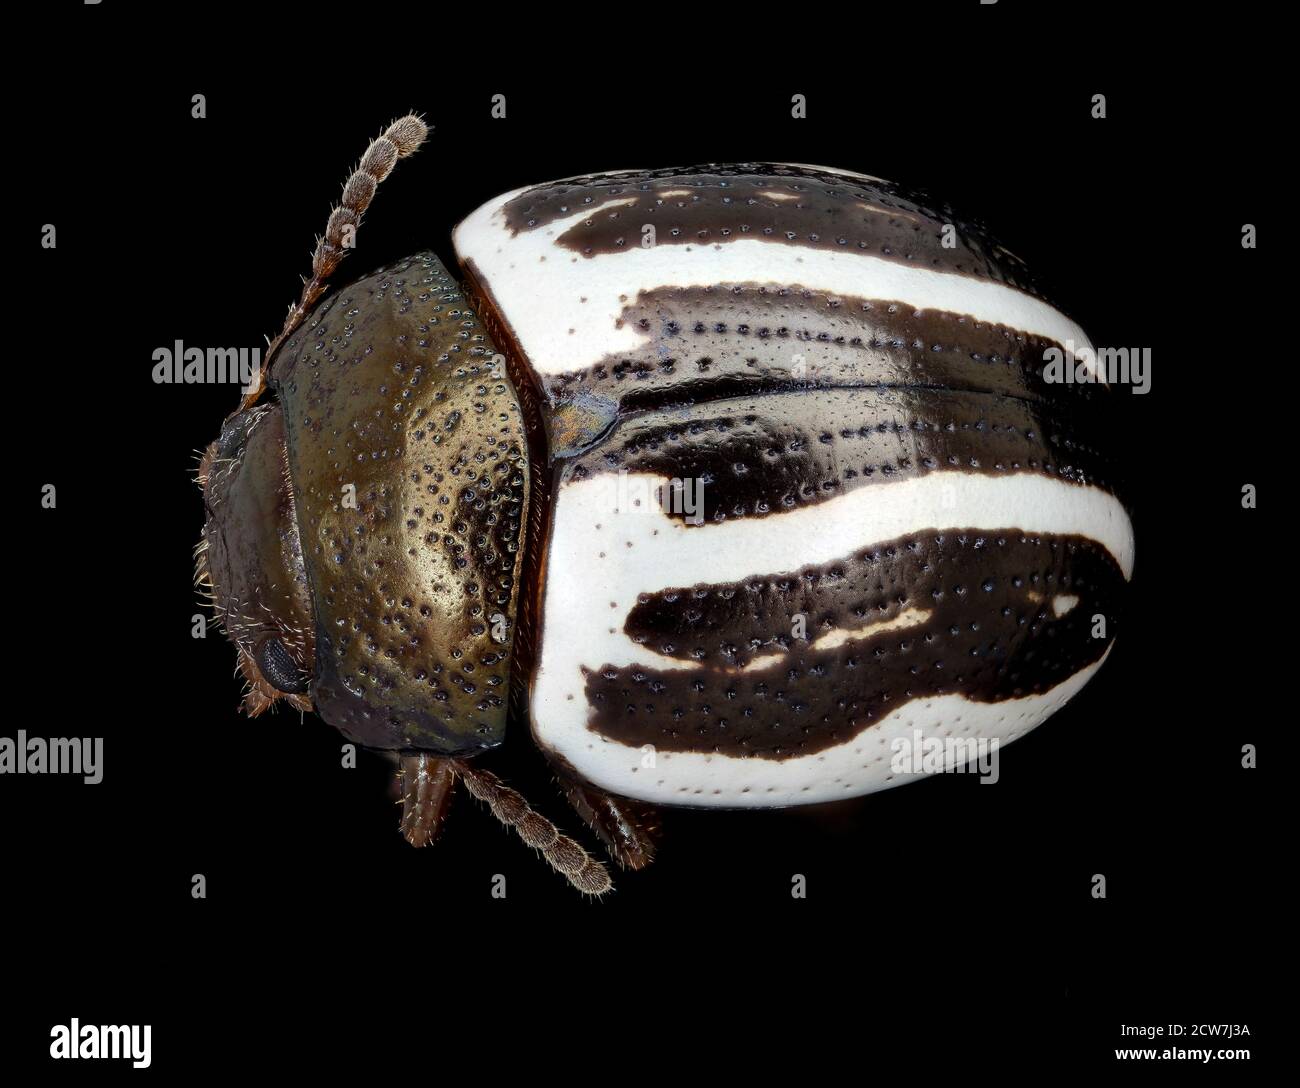 Black and white beetle, back, MAGLEV 2020-08-12-18.14.44 ZS PMax UDR Stock Photo